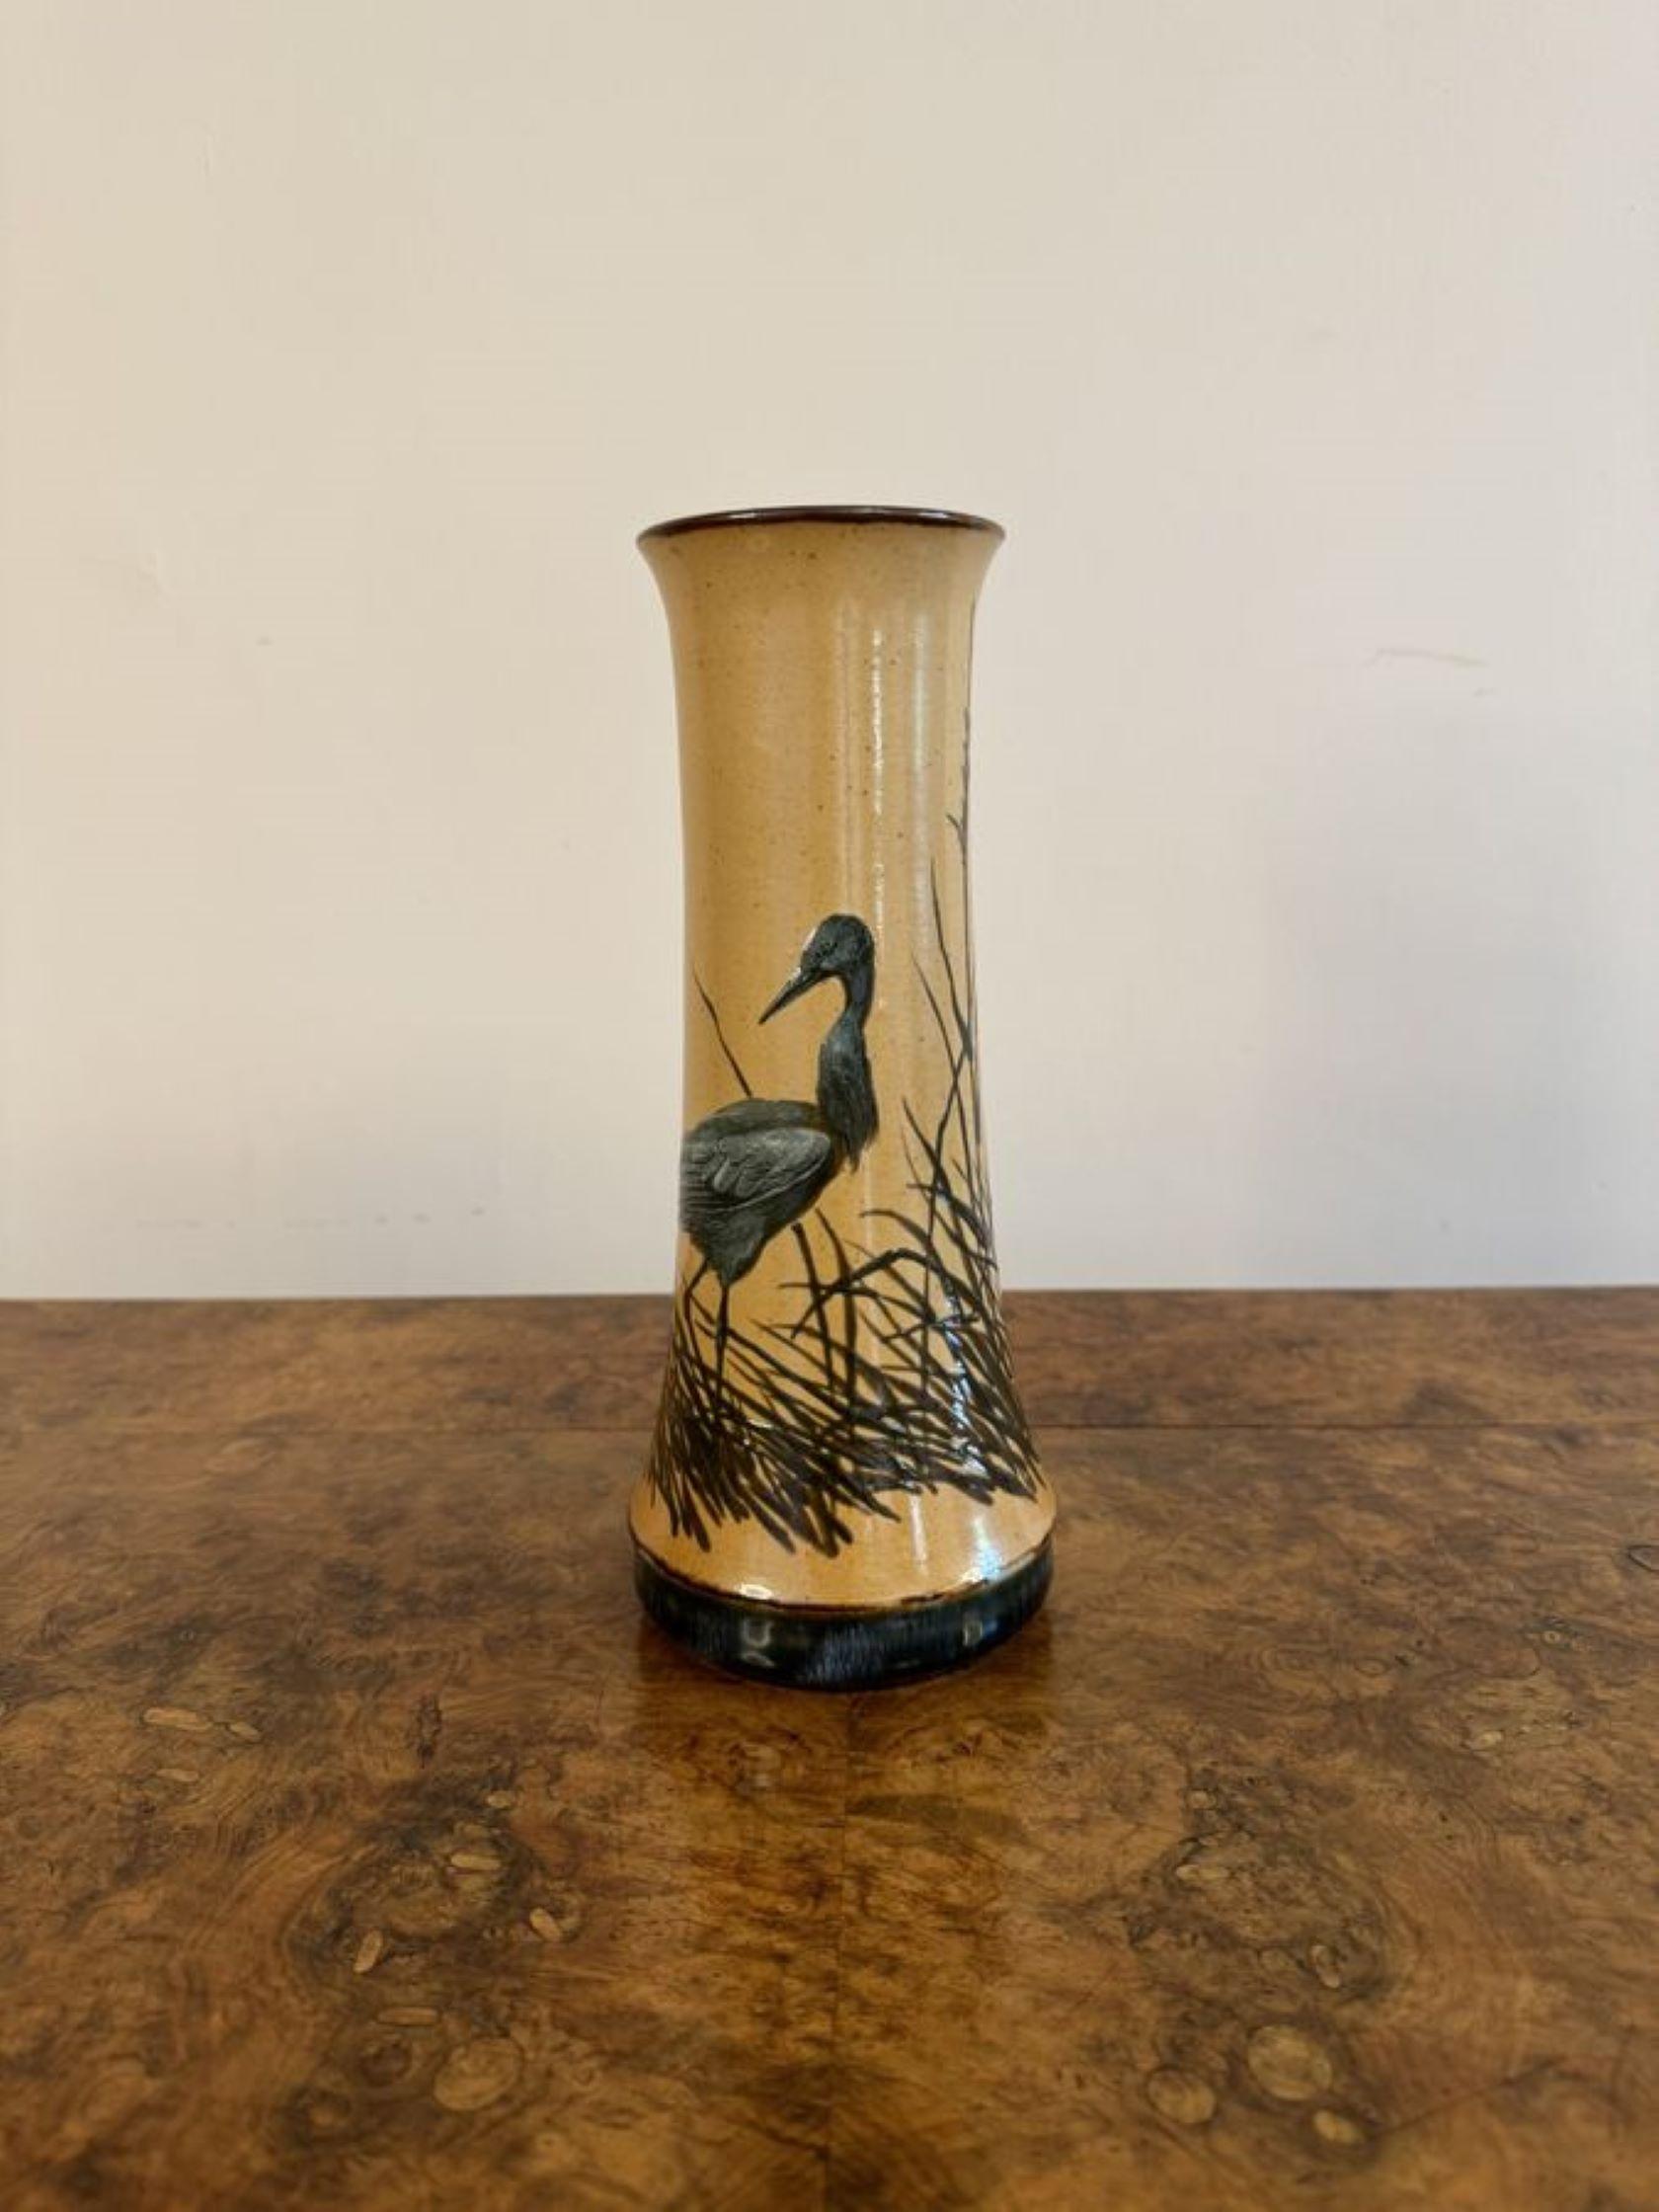 Stunning quality antique Doulton vase by Florence E Barlow, having a quality antique doulton vase by Florence E Barlow with a brown ground decorated with beautiful birds surrounded by grass raised on a circular shaped base.
Stamped and signed to the